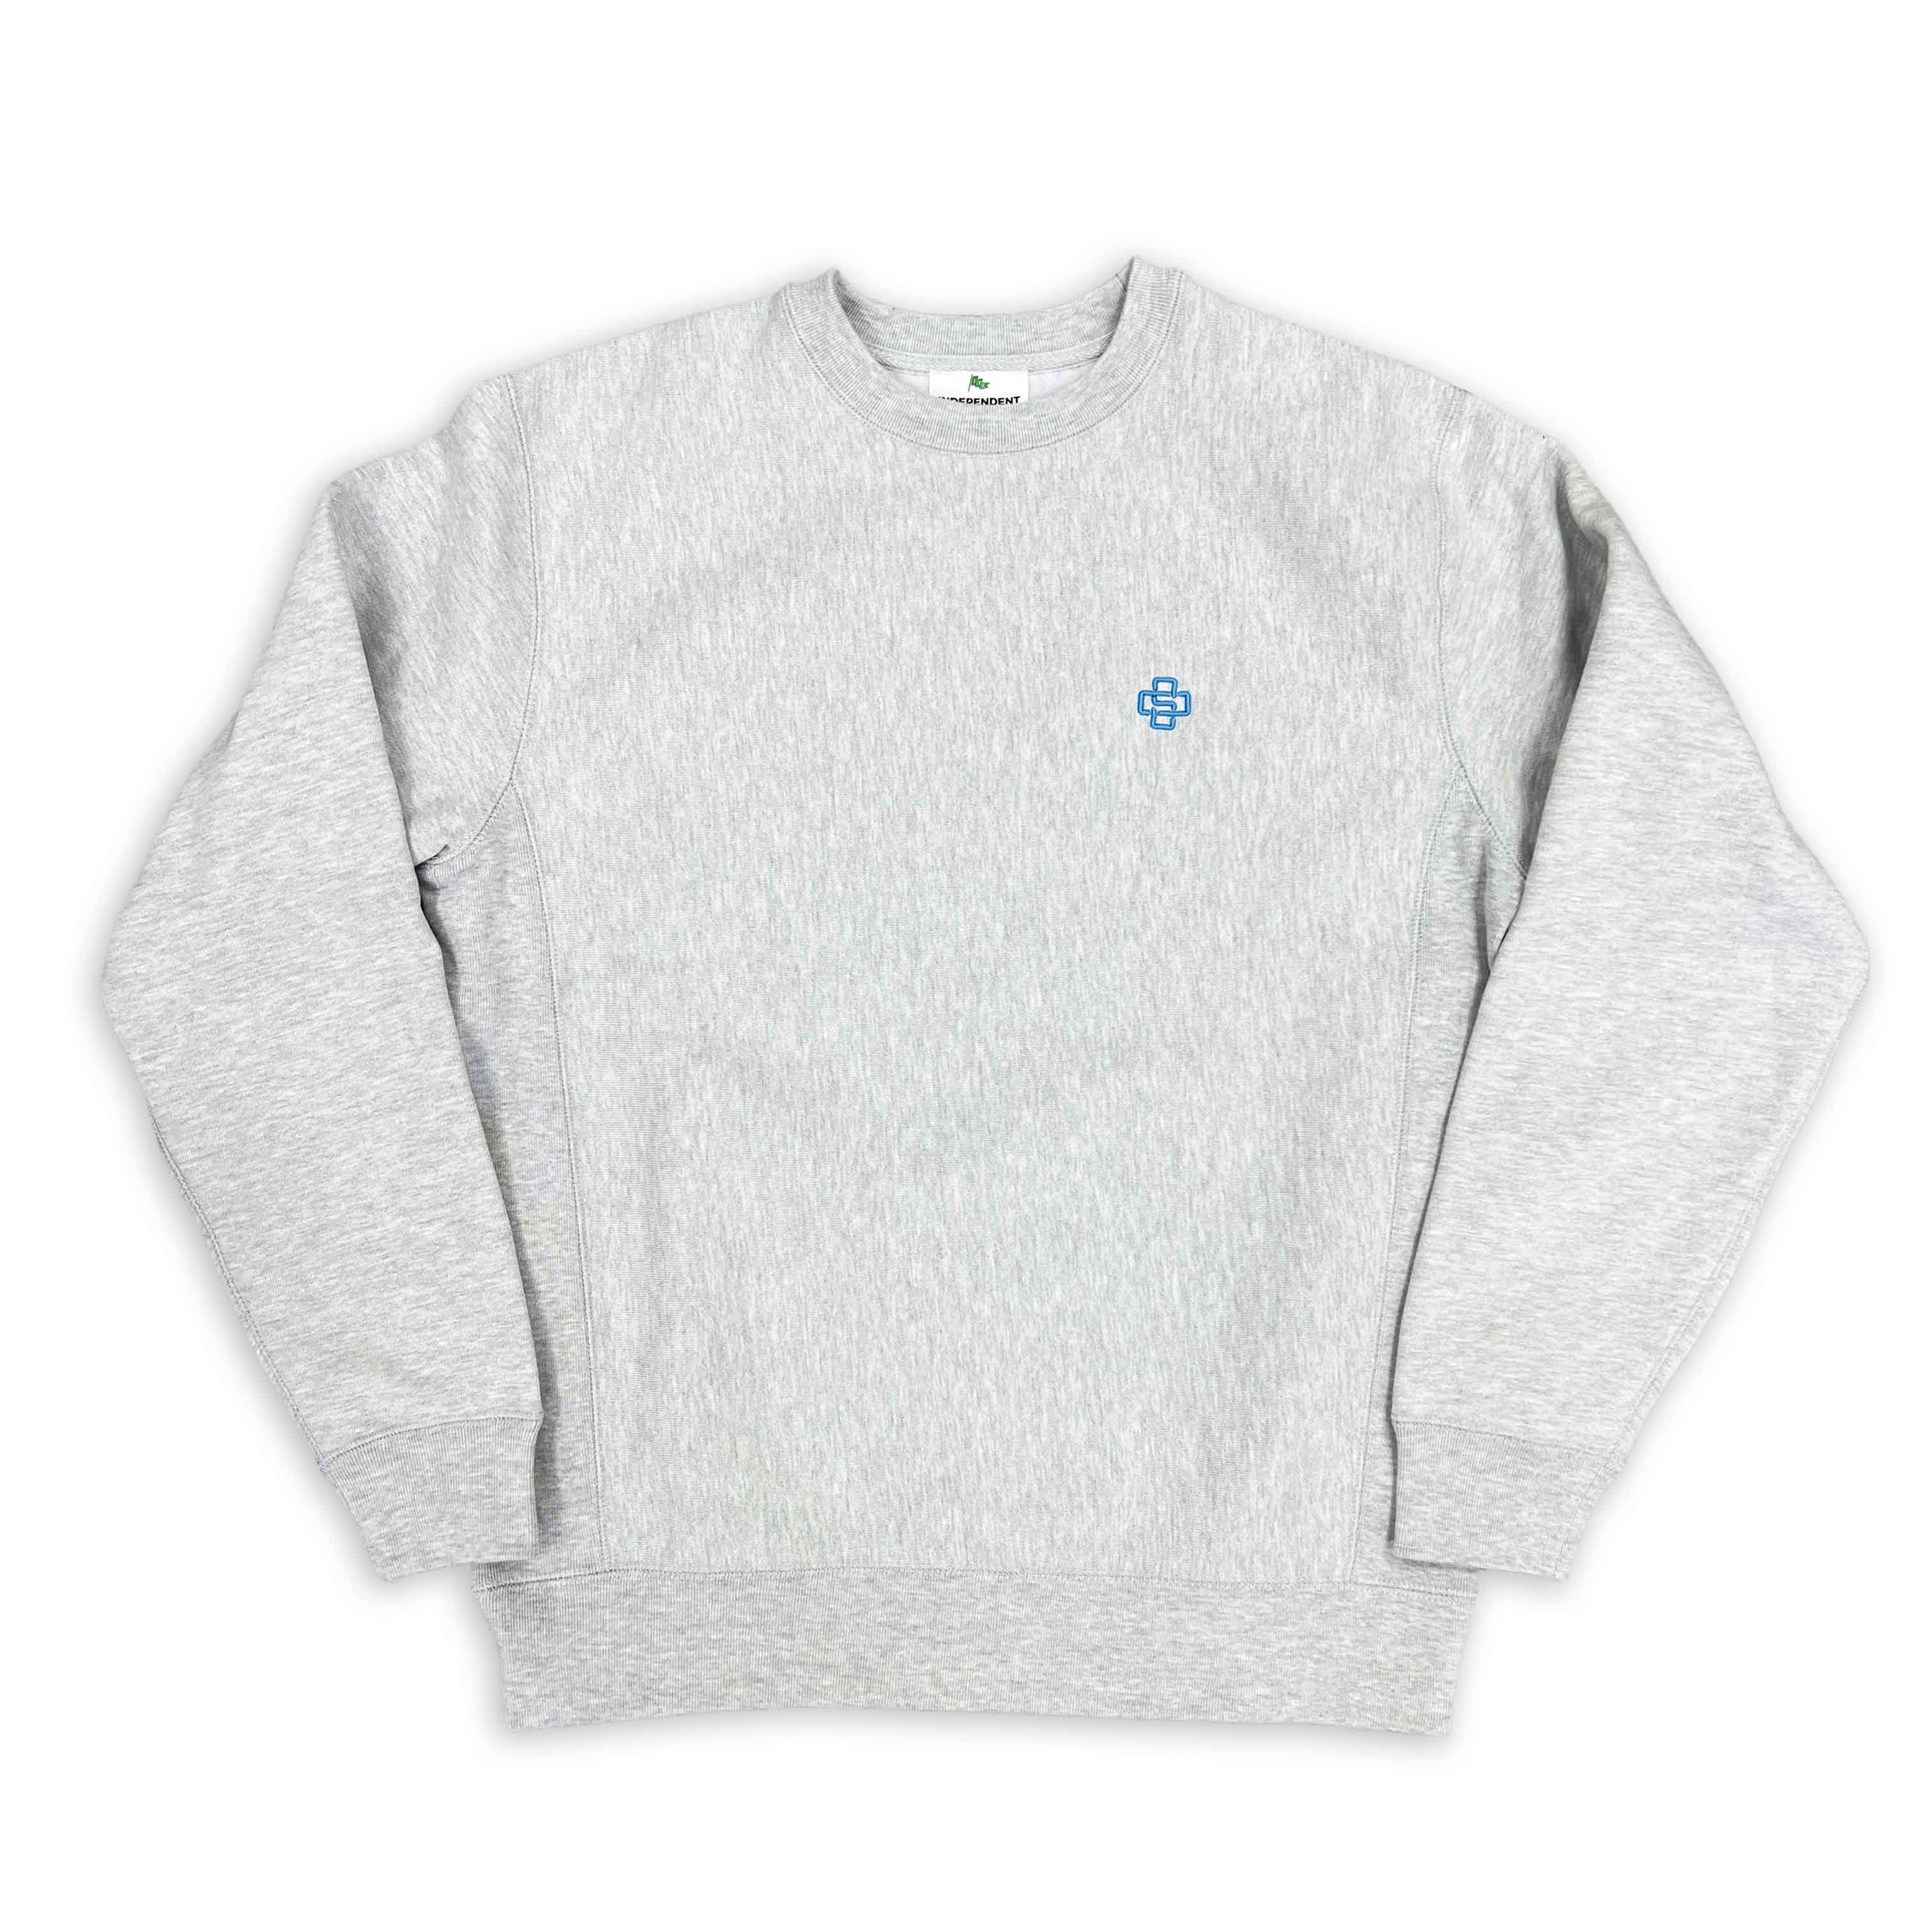 Soled Out Crewneck Sweater "SO+" Grey New Size M